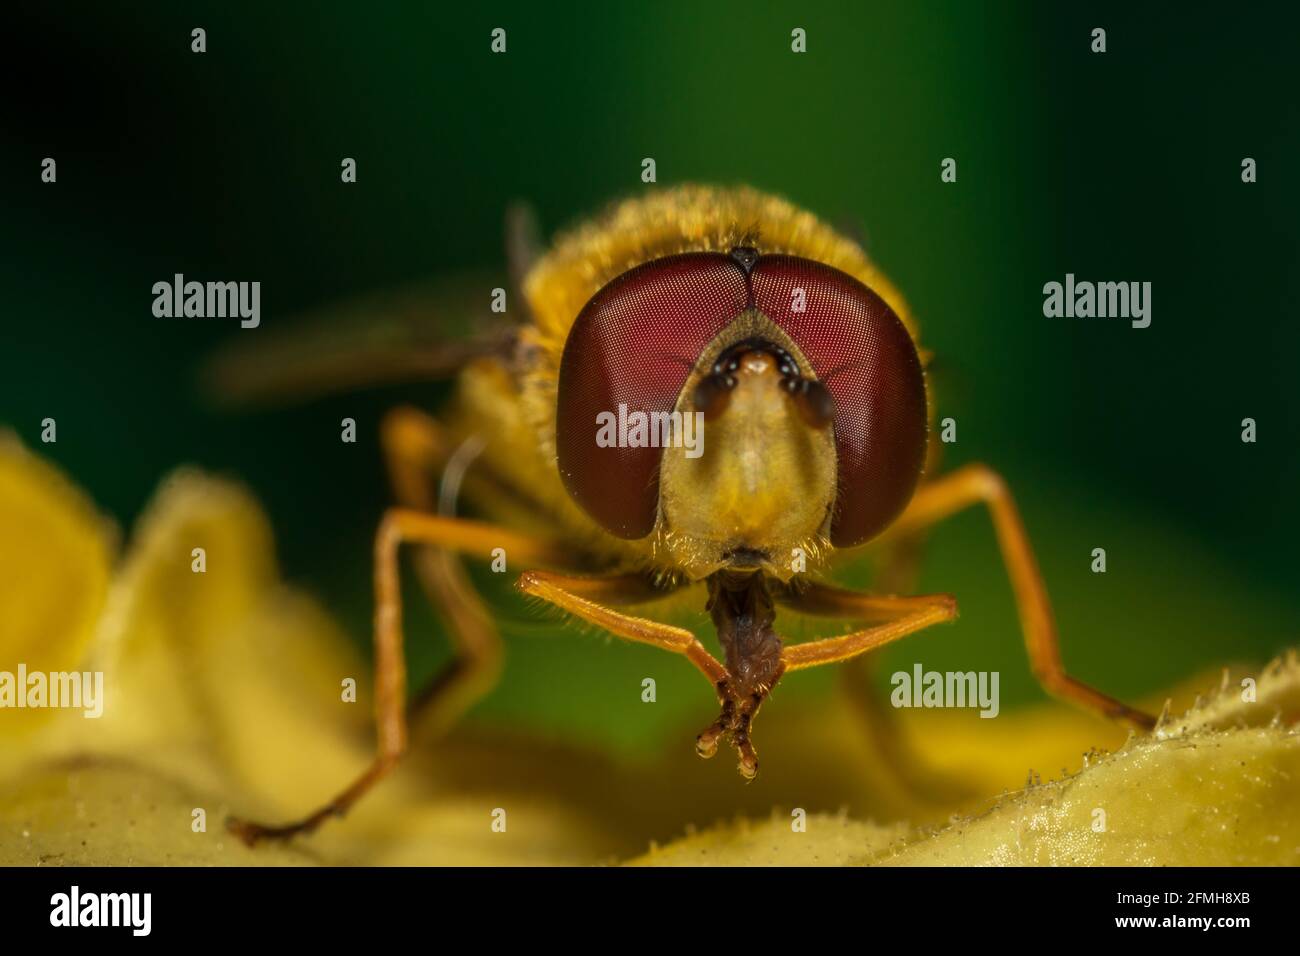 Front view of a hoverfly (syrphid fly) licking its front legs while sat on the yellow leaves of a plant. The big red compound eyes being the focus Stock Photo